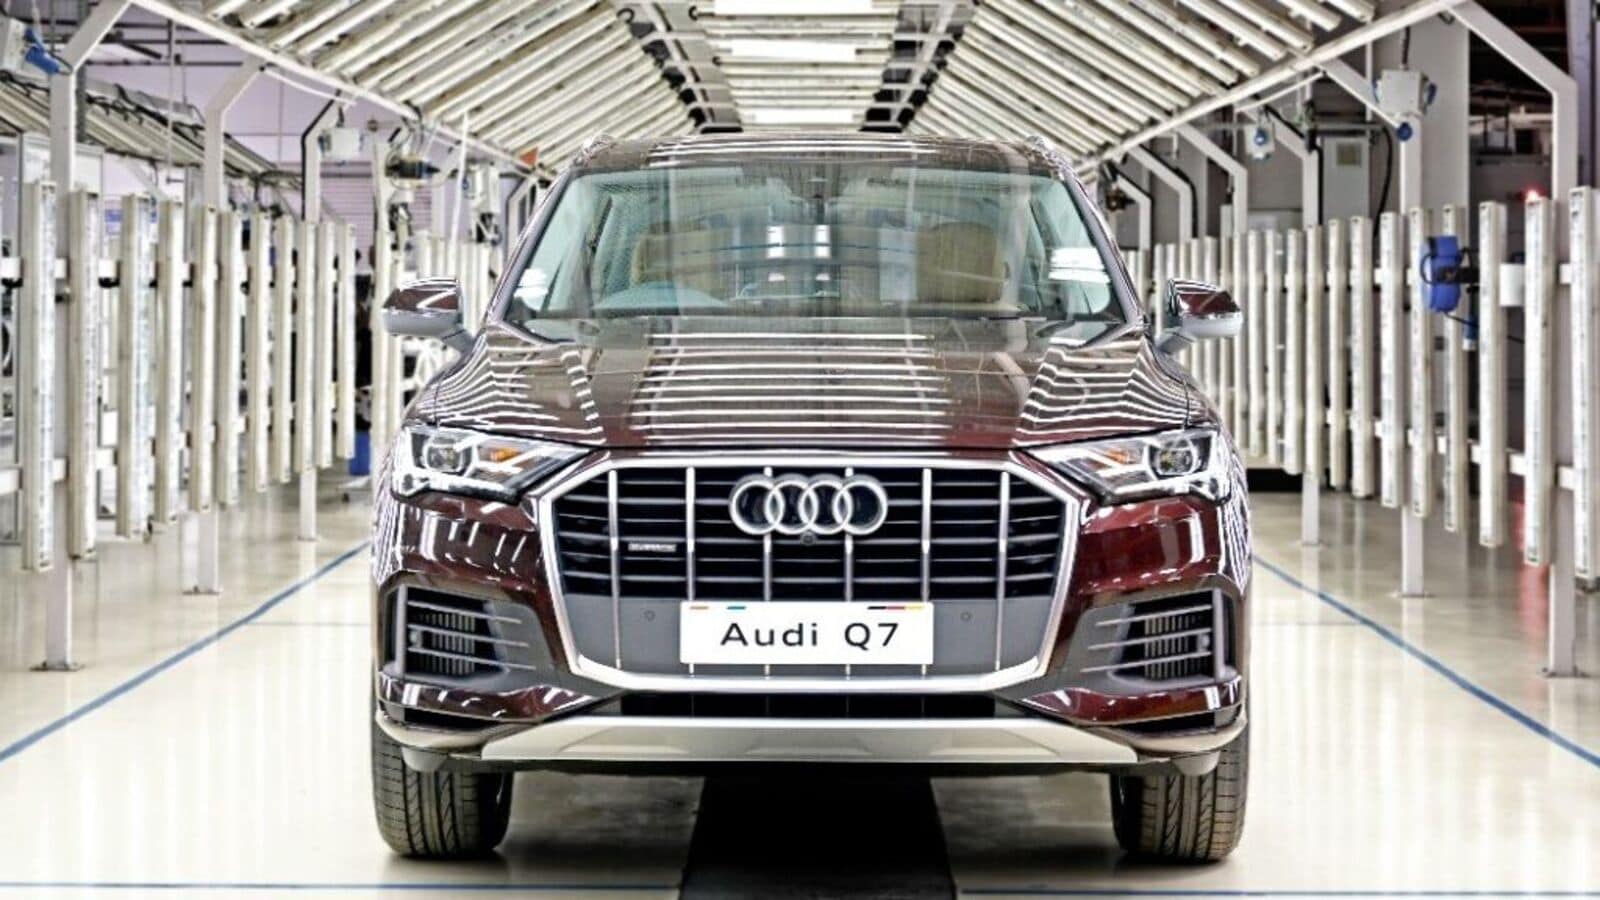 Audi Q7 Limited edition launched at ₹88.08 lakh in India